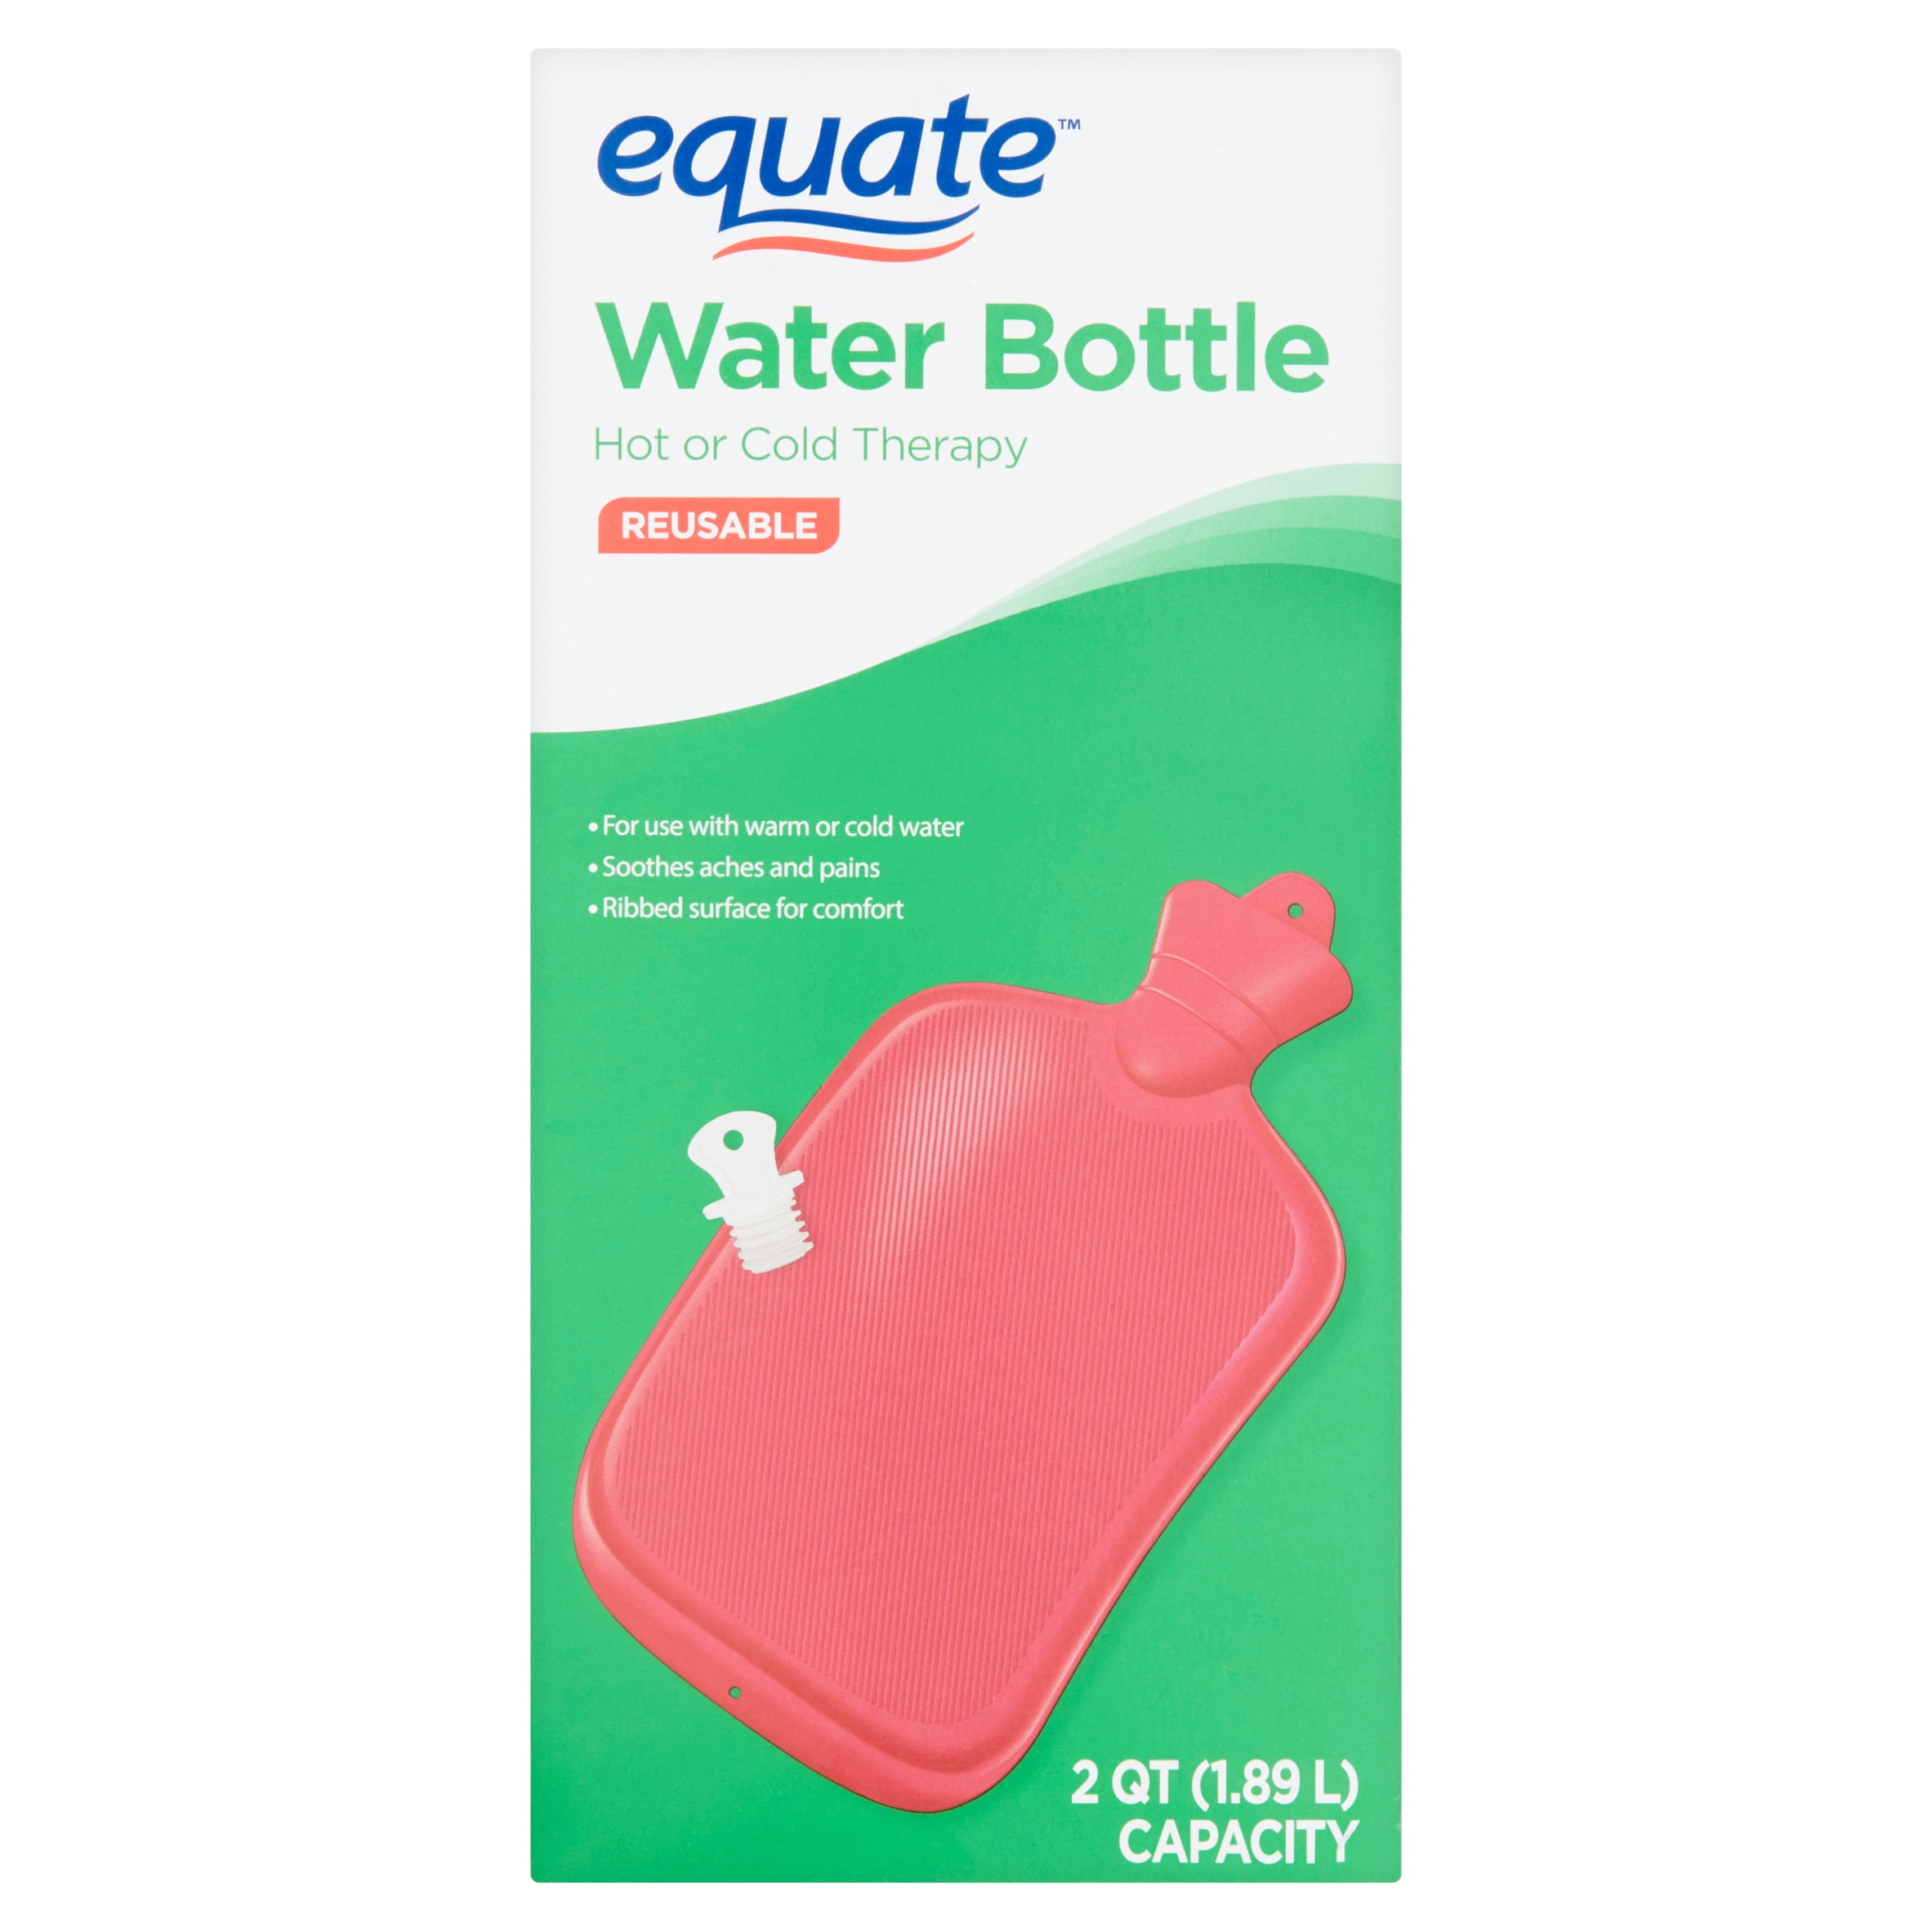 Equate Reusable Hot or Cold Therapy Water Bottle 2 qt